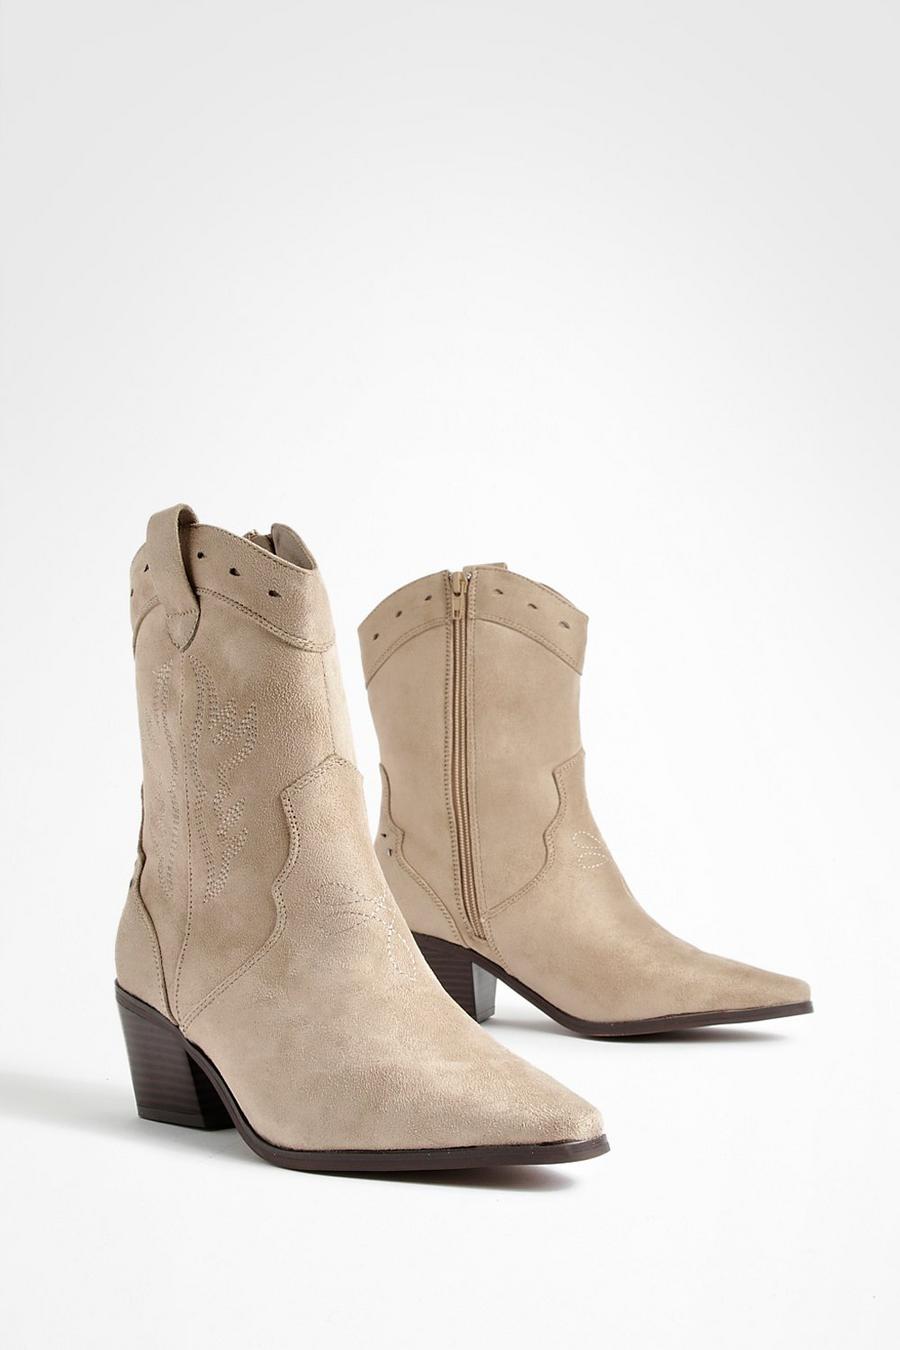 Western Cowboy-Stiefel mit Cut-Out Detail, Taupe